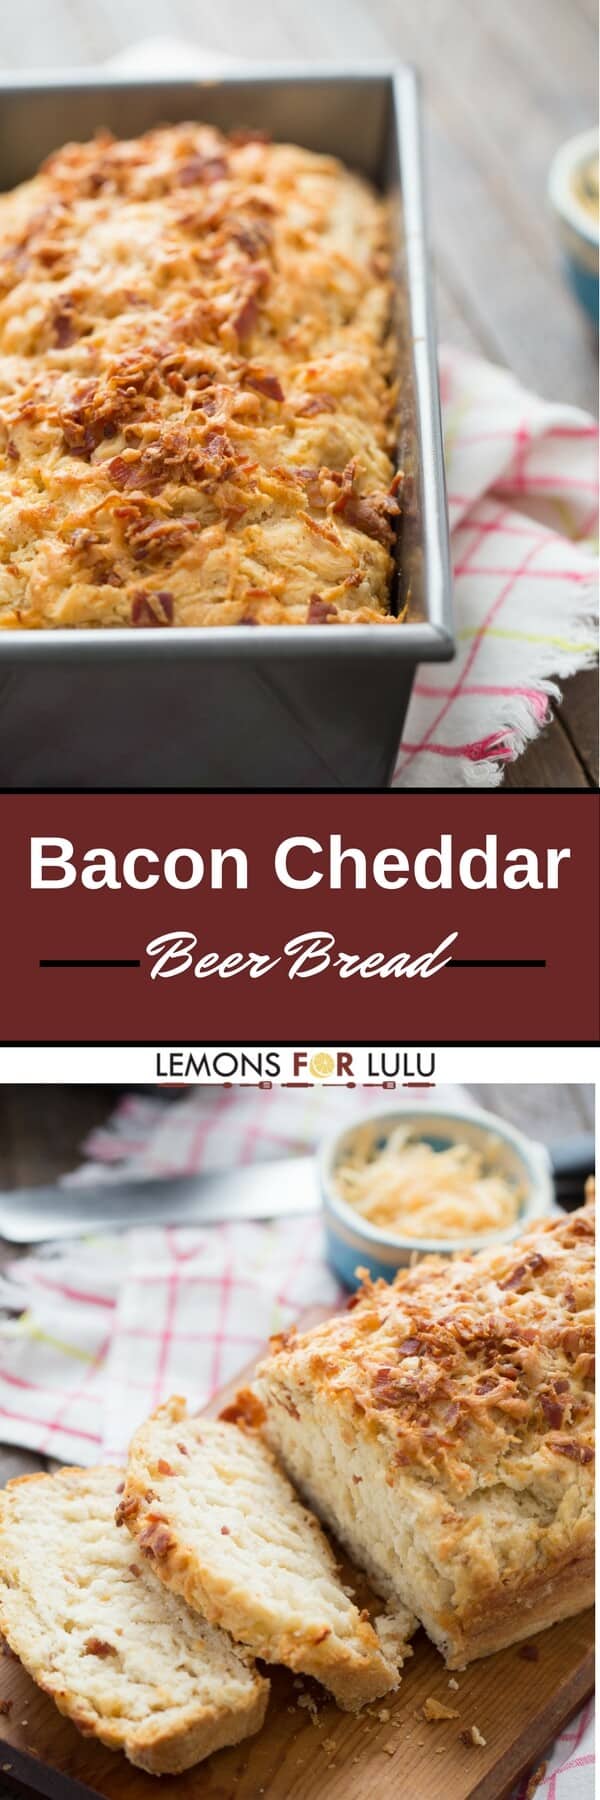 Love beer, bacon and cheese? So do I! That's why this easy beer bread recipe is one of my favorites. It's simple, soft and so delicious!